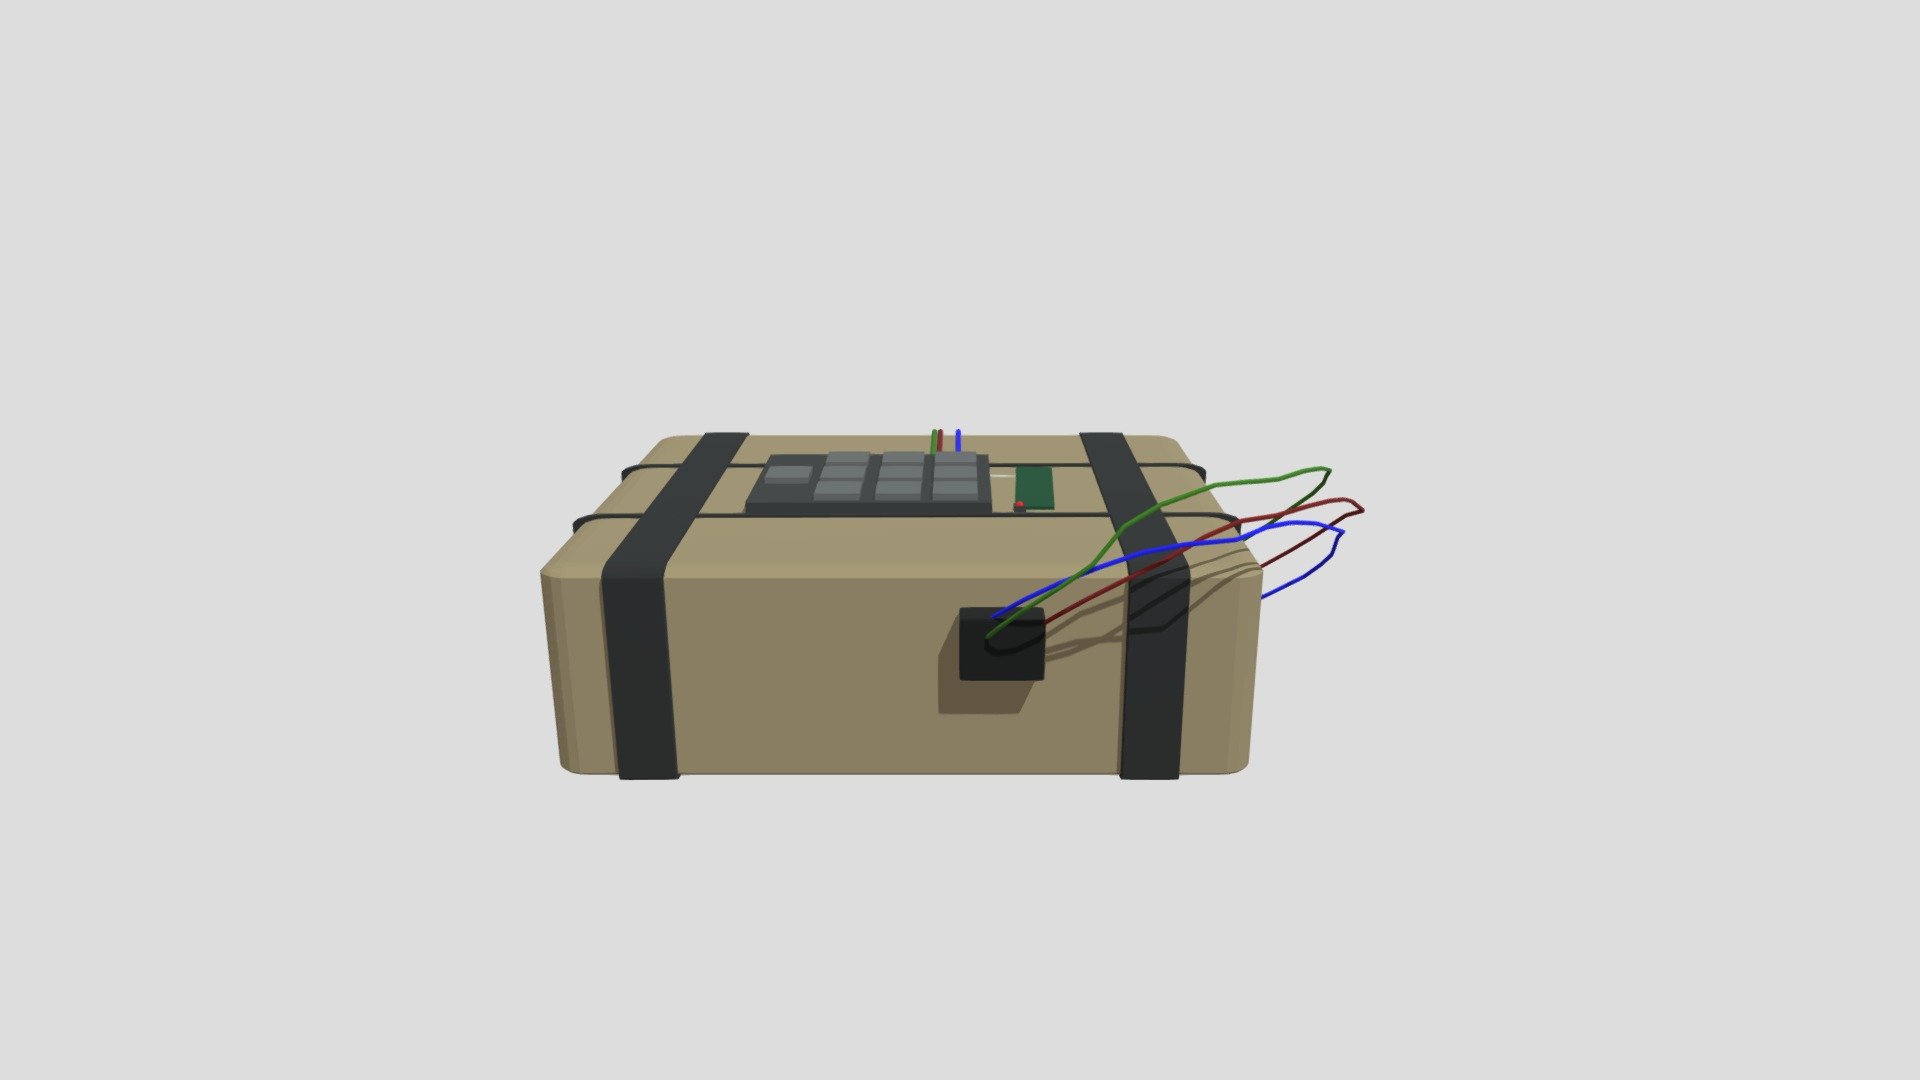 Free c4 bomb 3d model.
I made it in a blender out of boredom.
I spent 30 minutes creating it.
You can use it in your games and projects for free! - C4 bomb lowpoly - Download Free 3D model by TNTRAT (@lanan67mail.ru) 3d model